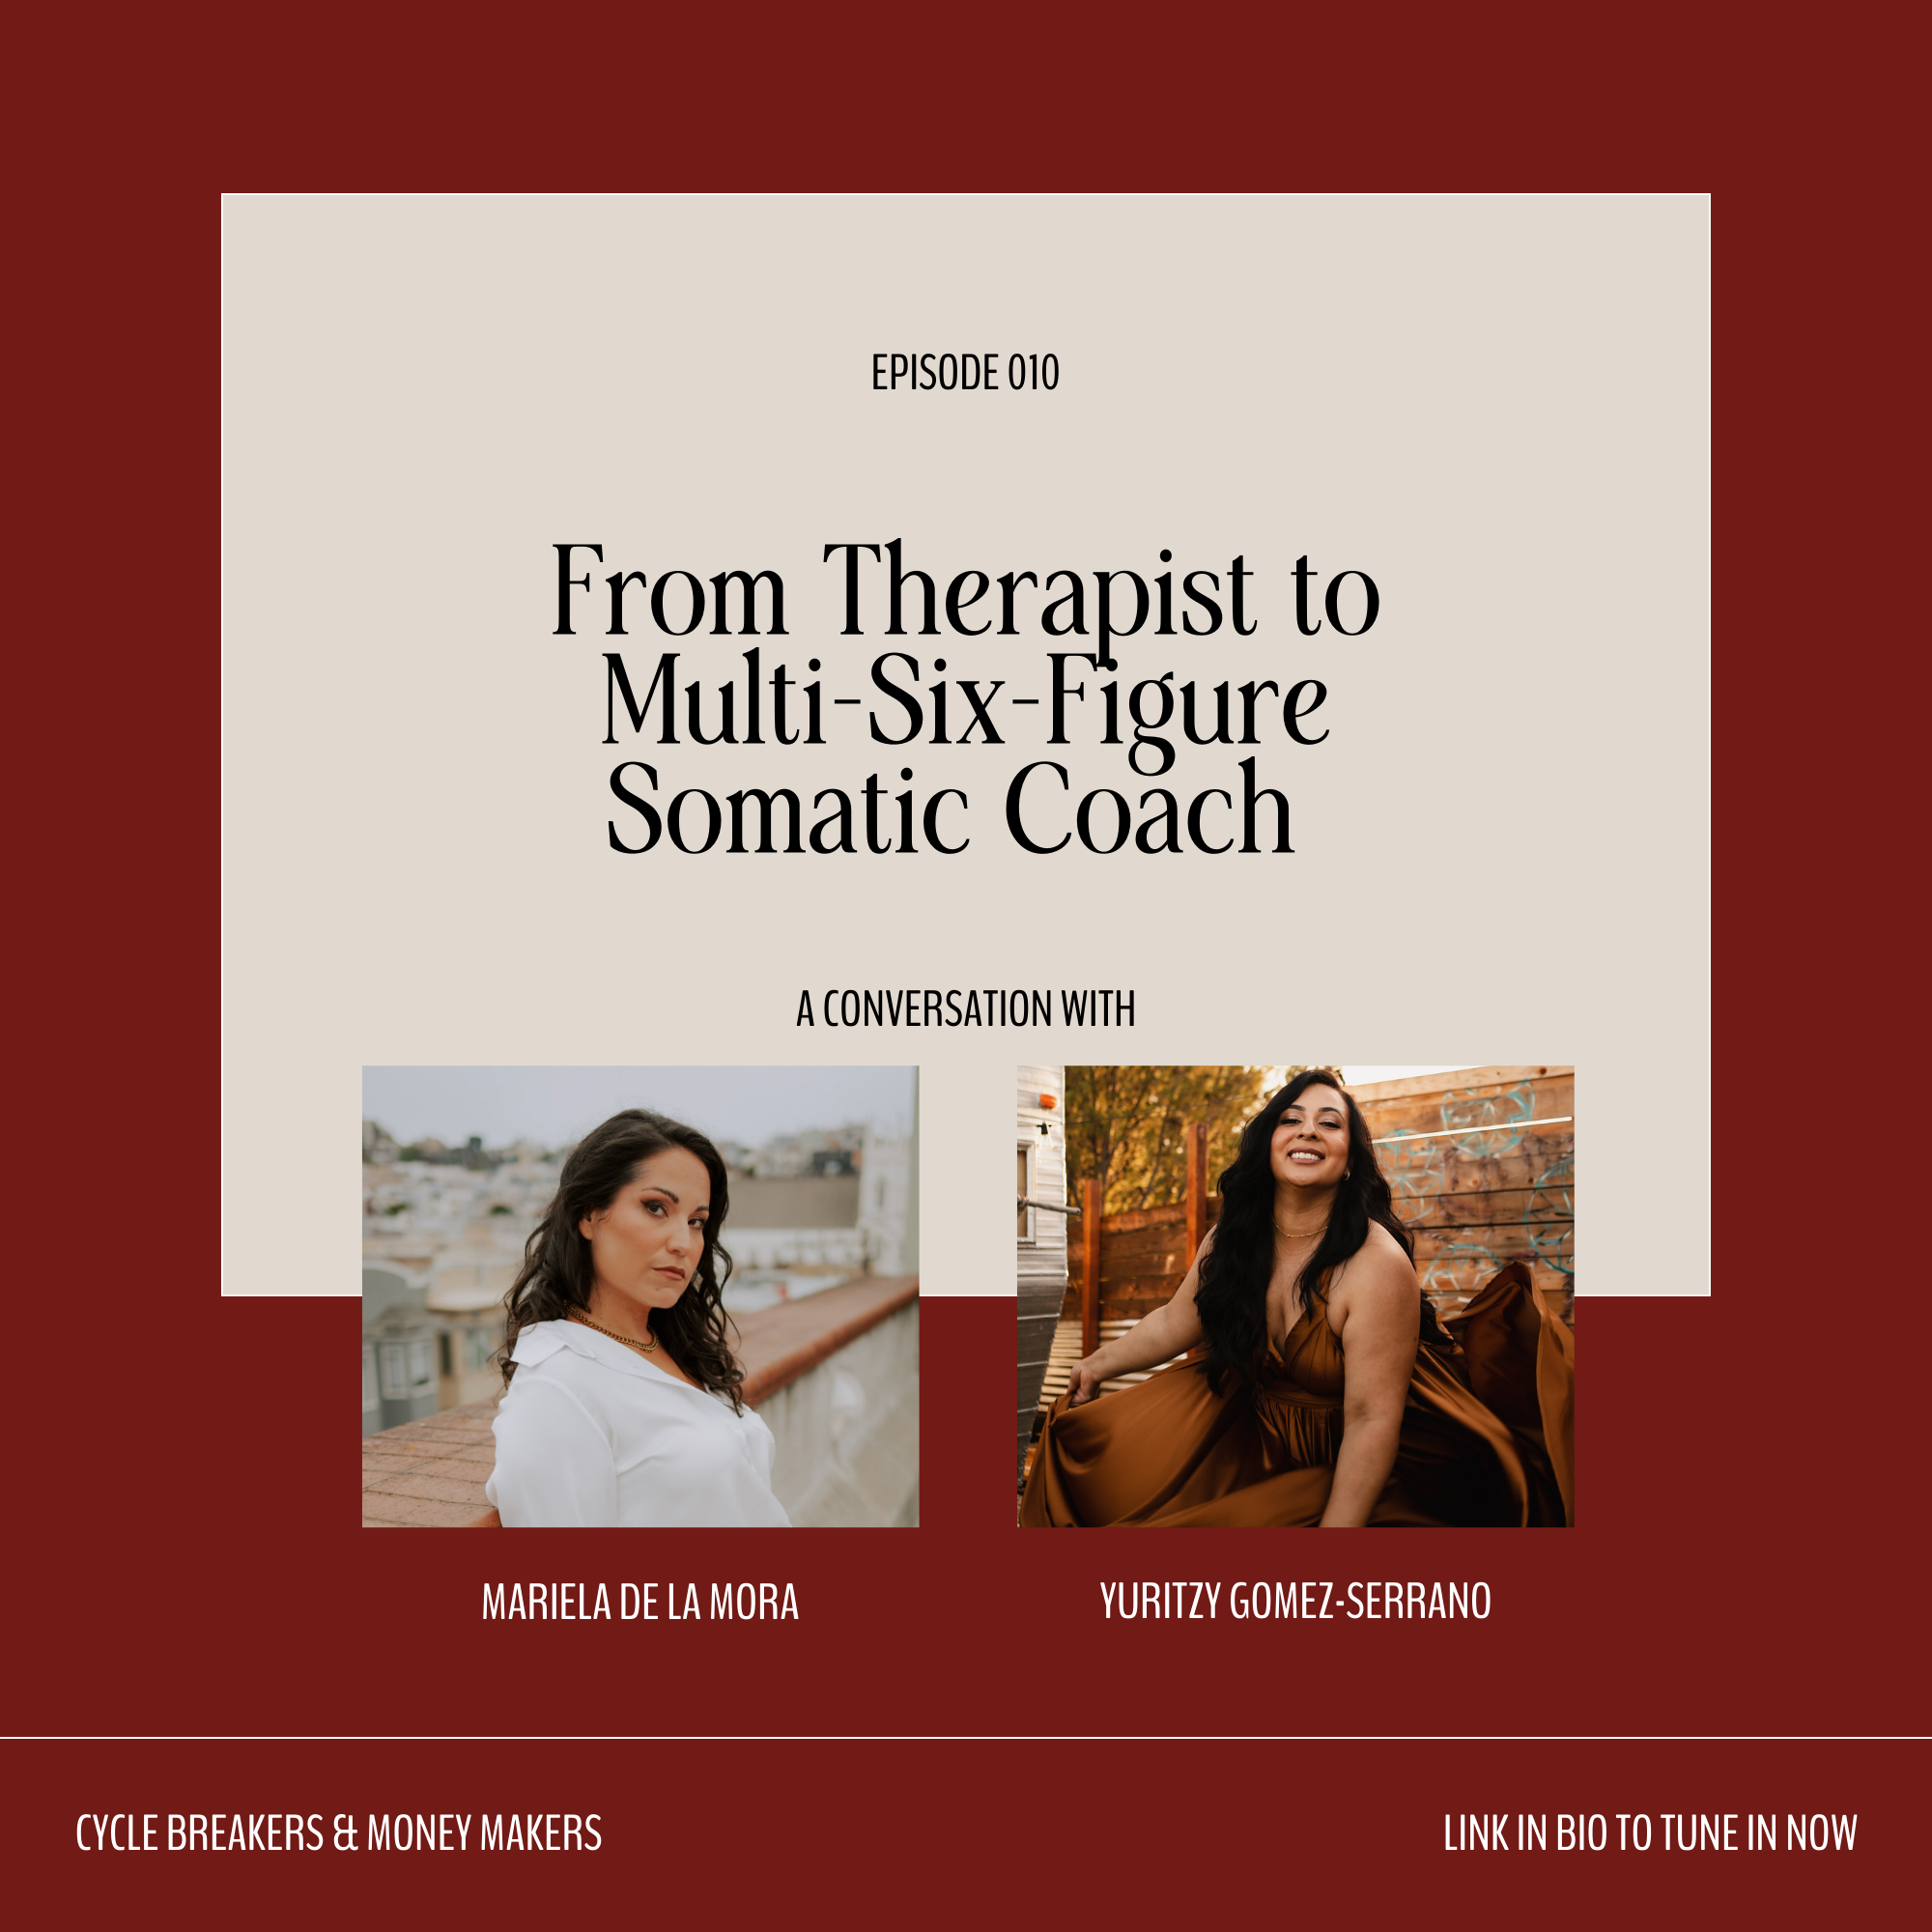 From Therapist to Multi-Six-Figure Somatic Coach